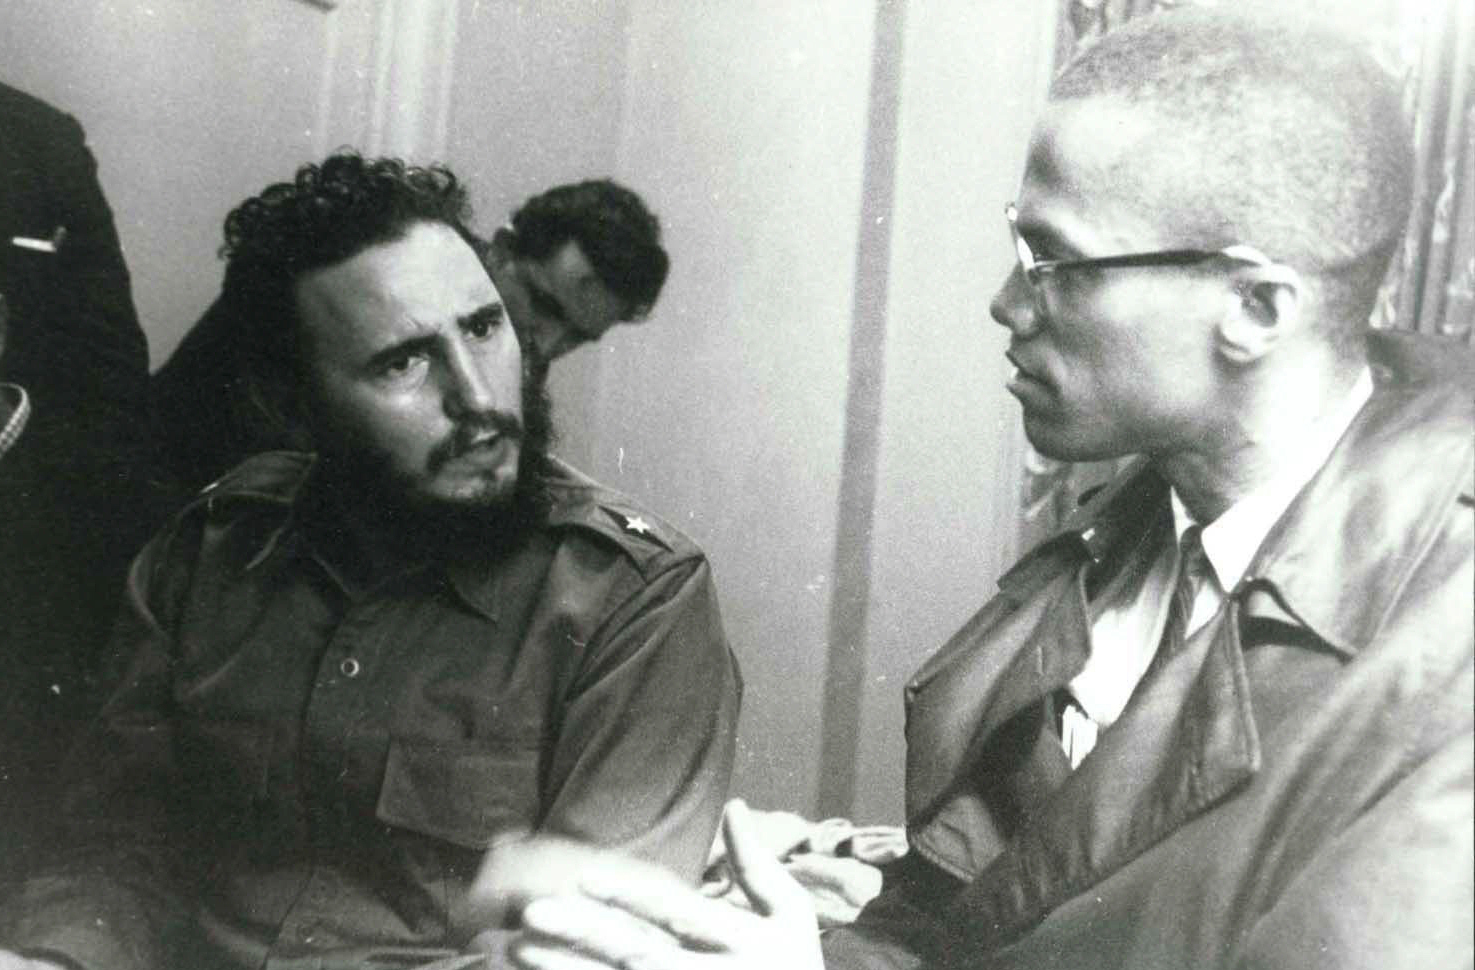 Fidel (2002) Directed by Estela Bravo Shown: Fidel Castro, Malcolm X Featuring: Fidel Castro, Malcolm X Where: Cuba, Mexico When: 28 Apr 2015 Credit: WENN.com **WENN does not claim any ownership including but not limited to Copyright, License in attached material. Fees charged by WENN are for WENN's services only, do not, nor are they intended to, convey to the user any ownership of Copyright, License in material. By publishing this material you expressly agree to indemnify, to hold WENN, its directors, shareholders, employees harmless from any loss, claims, damages, demands, expenses (including legal fees), any causes of action, allegation against WENN arising out of, connected in any way with publication of the material.**